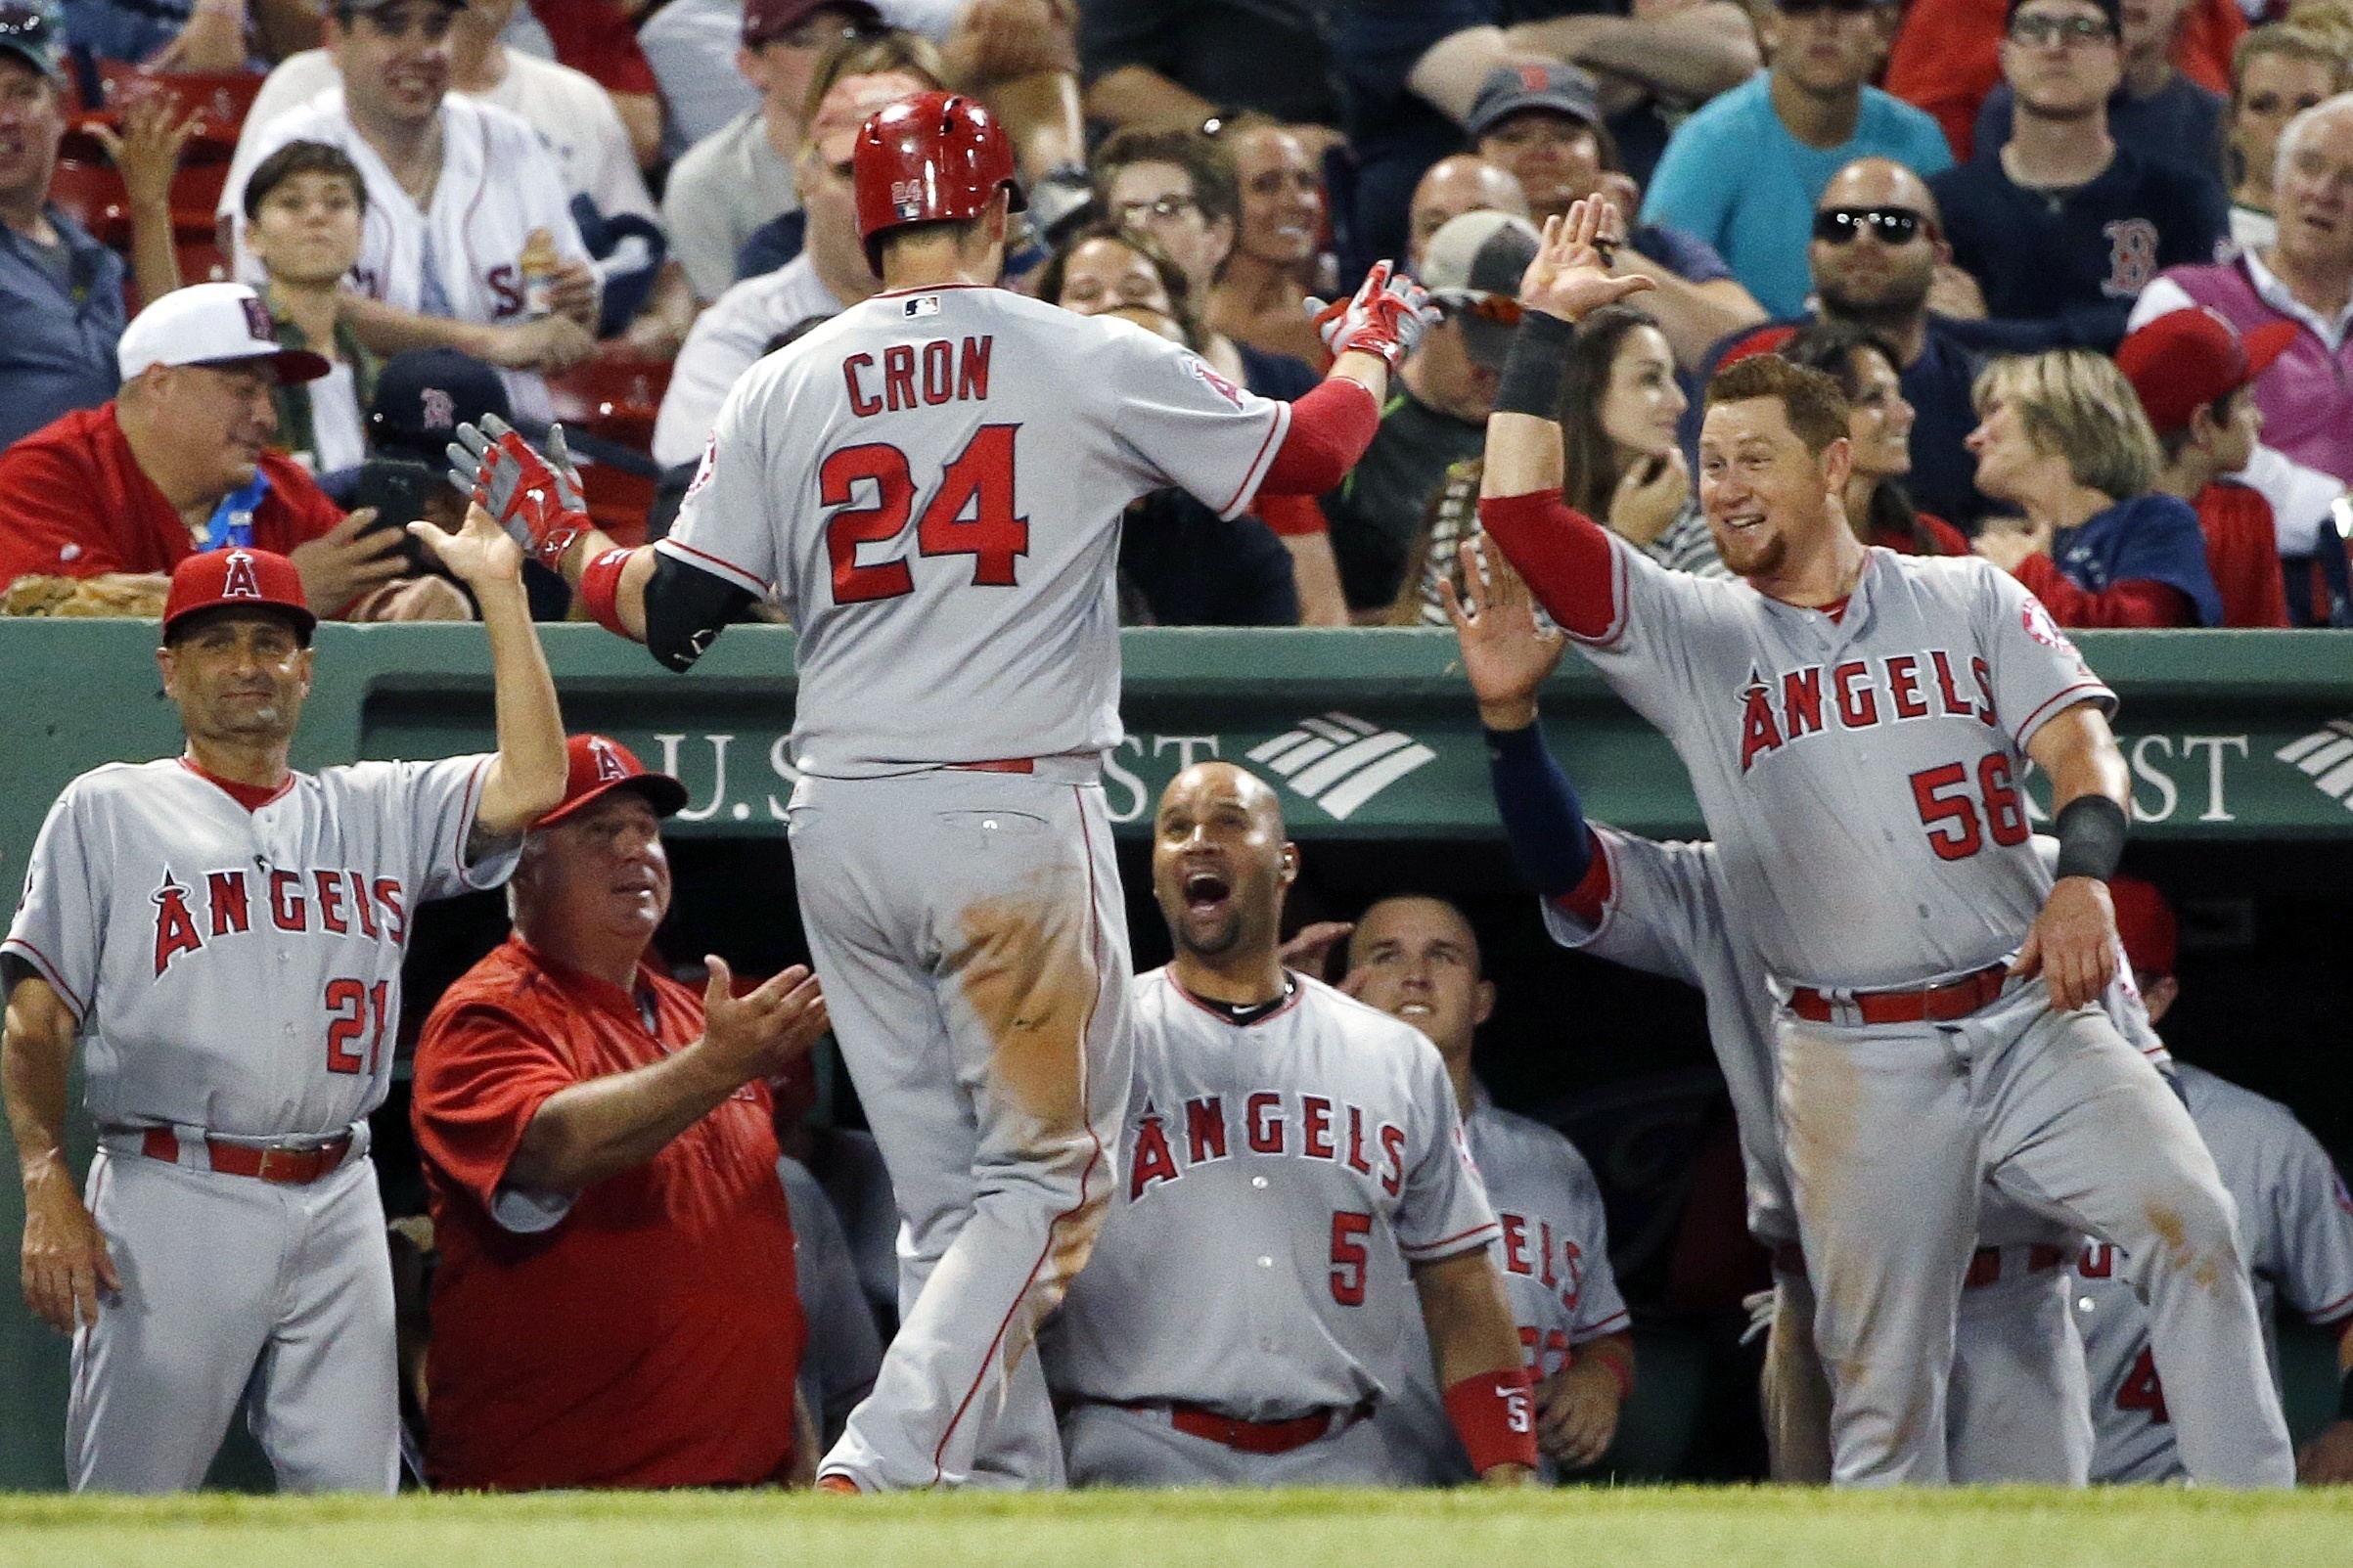 Angels make three costly errors in loss to Red Sox – Orange County Register